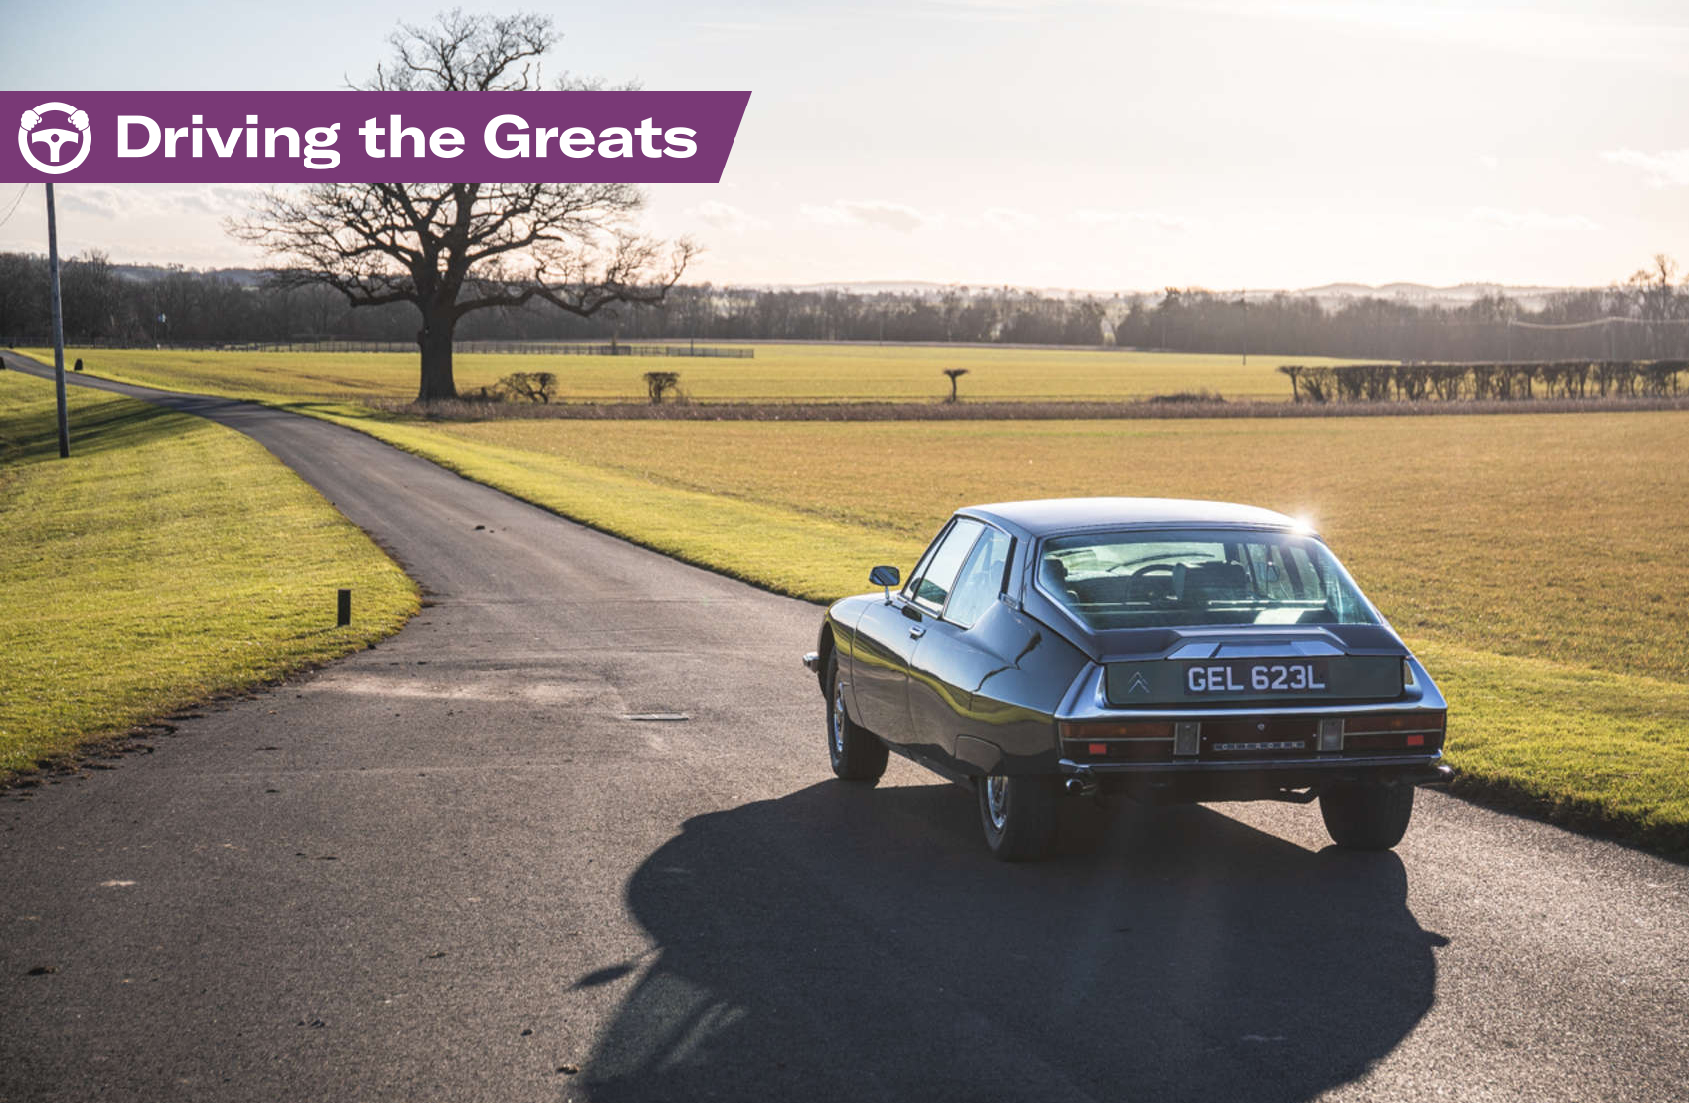 Driving the Greats: A Citroën SM is one of life’s great pleasures